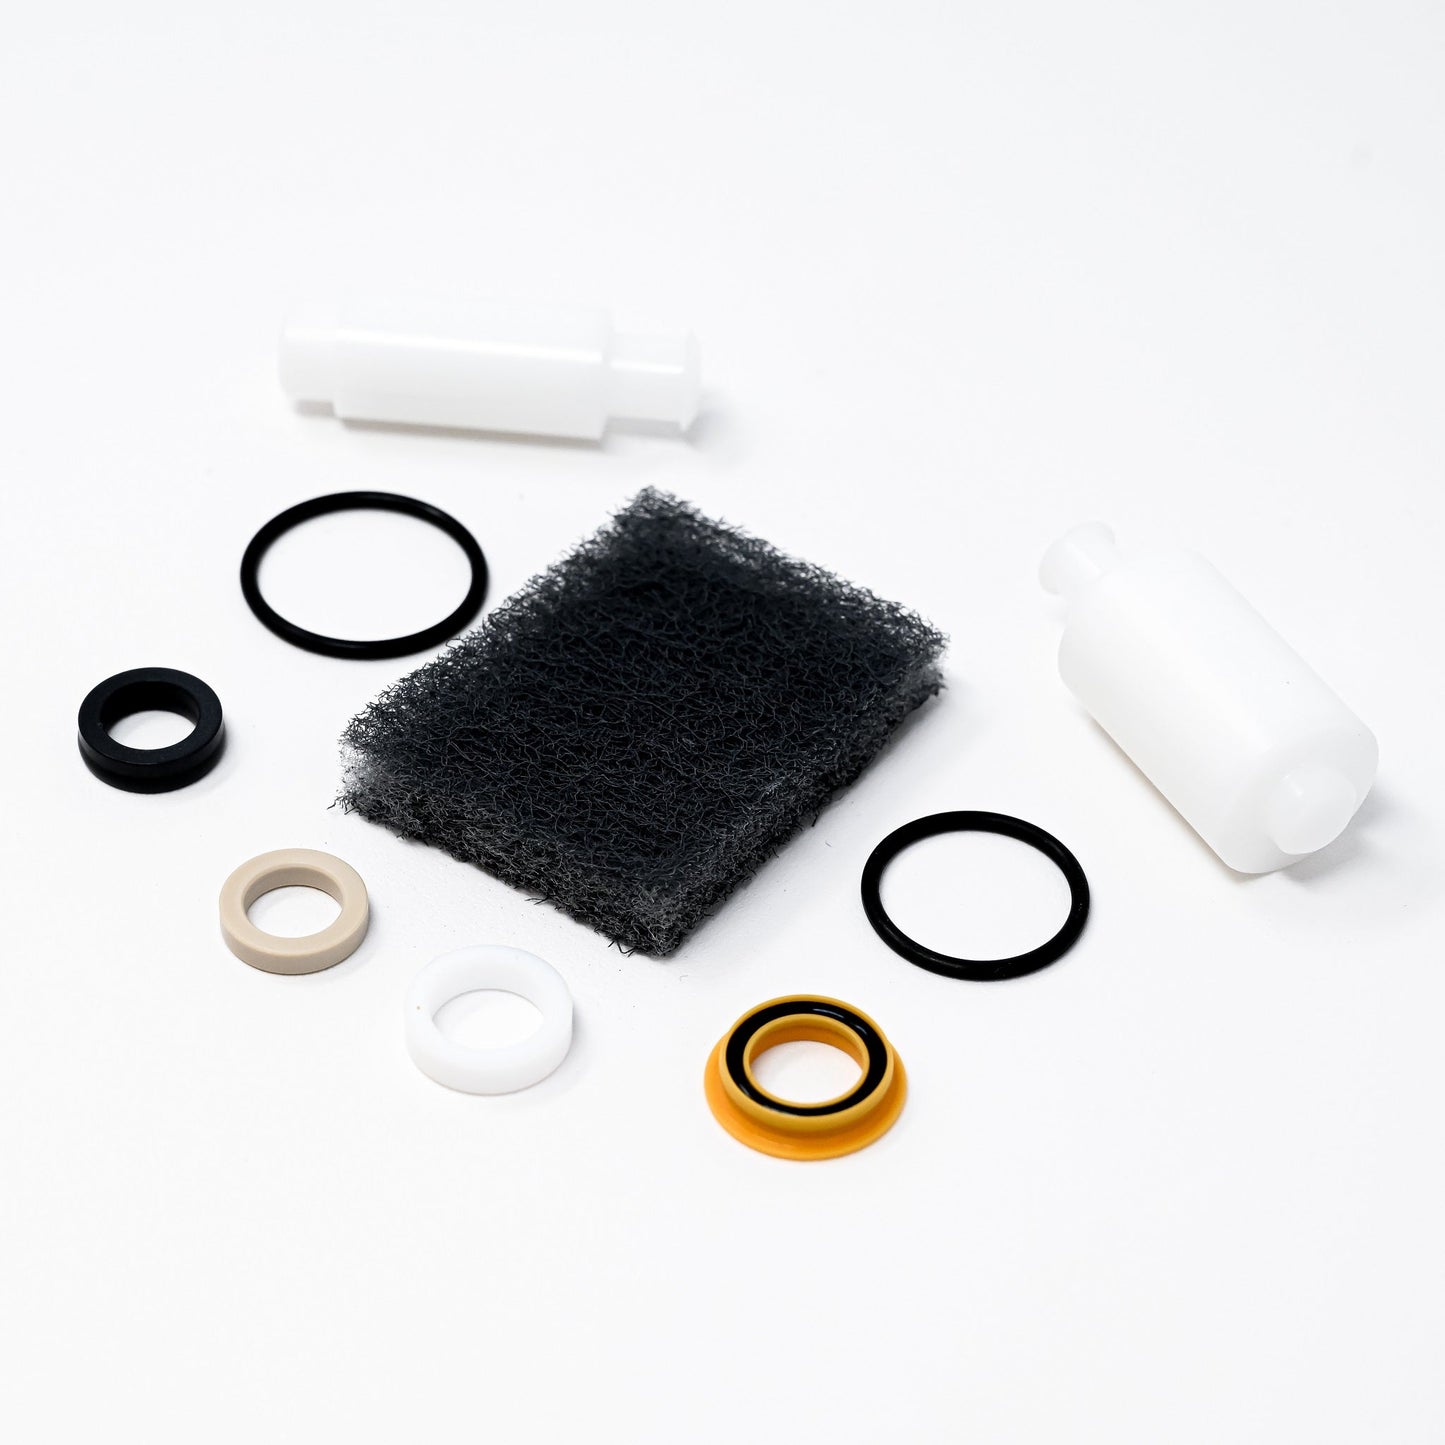 Seals, bushing, o-rings, diaphragm, scour pad and tool.